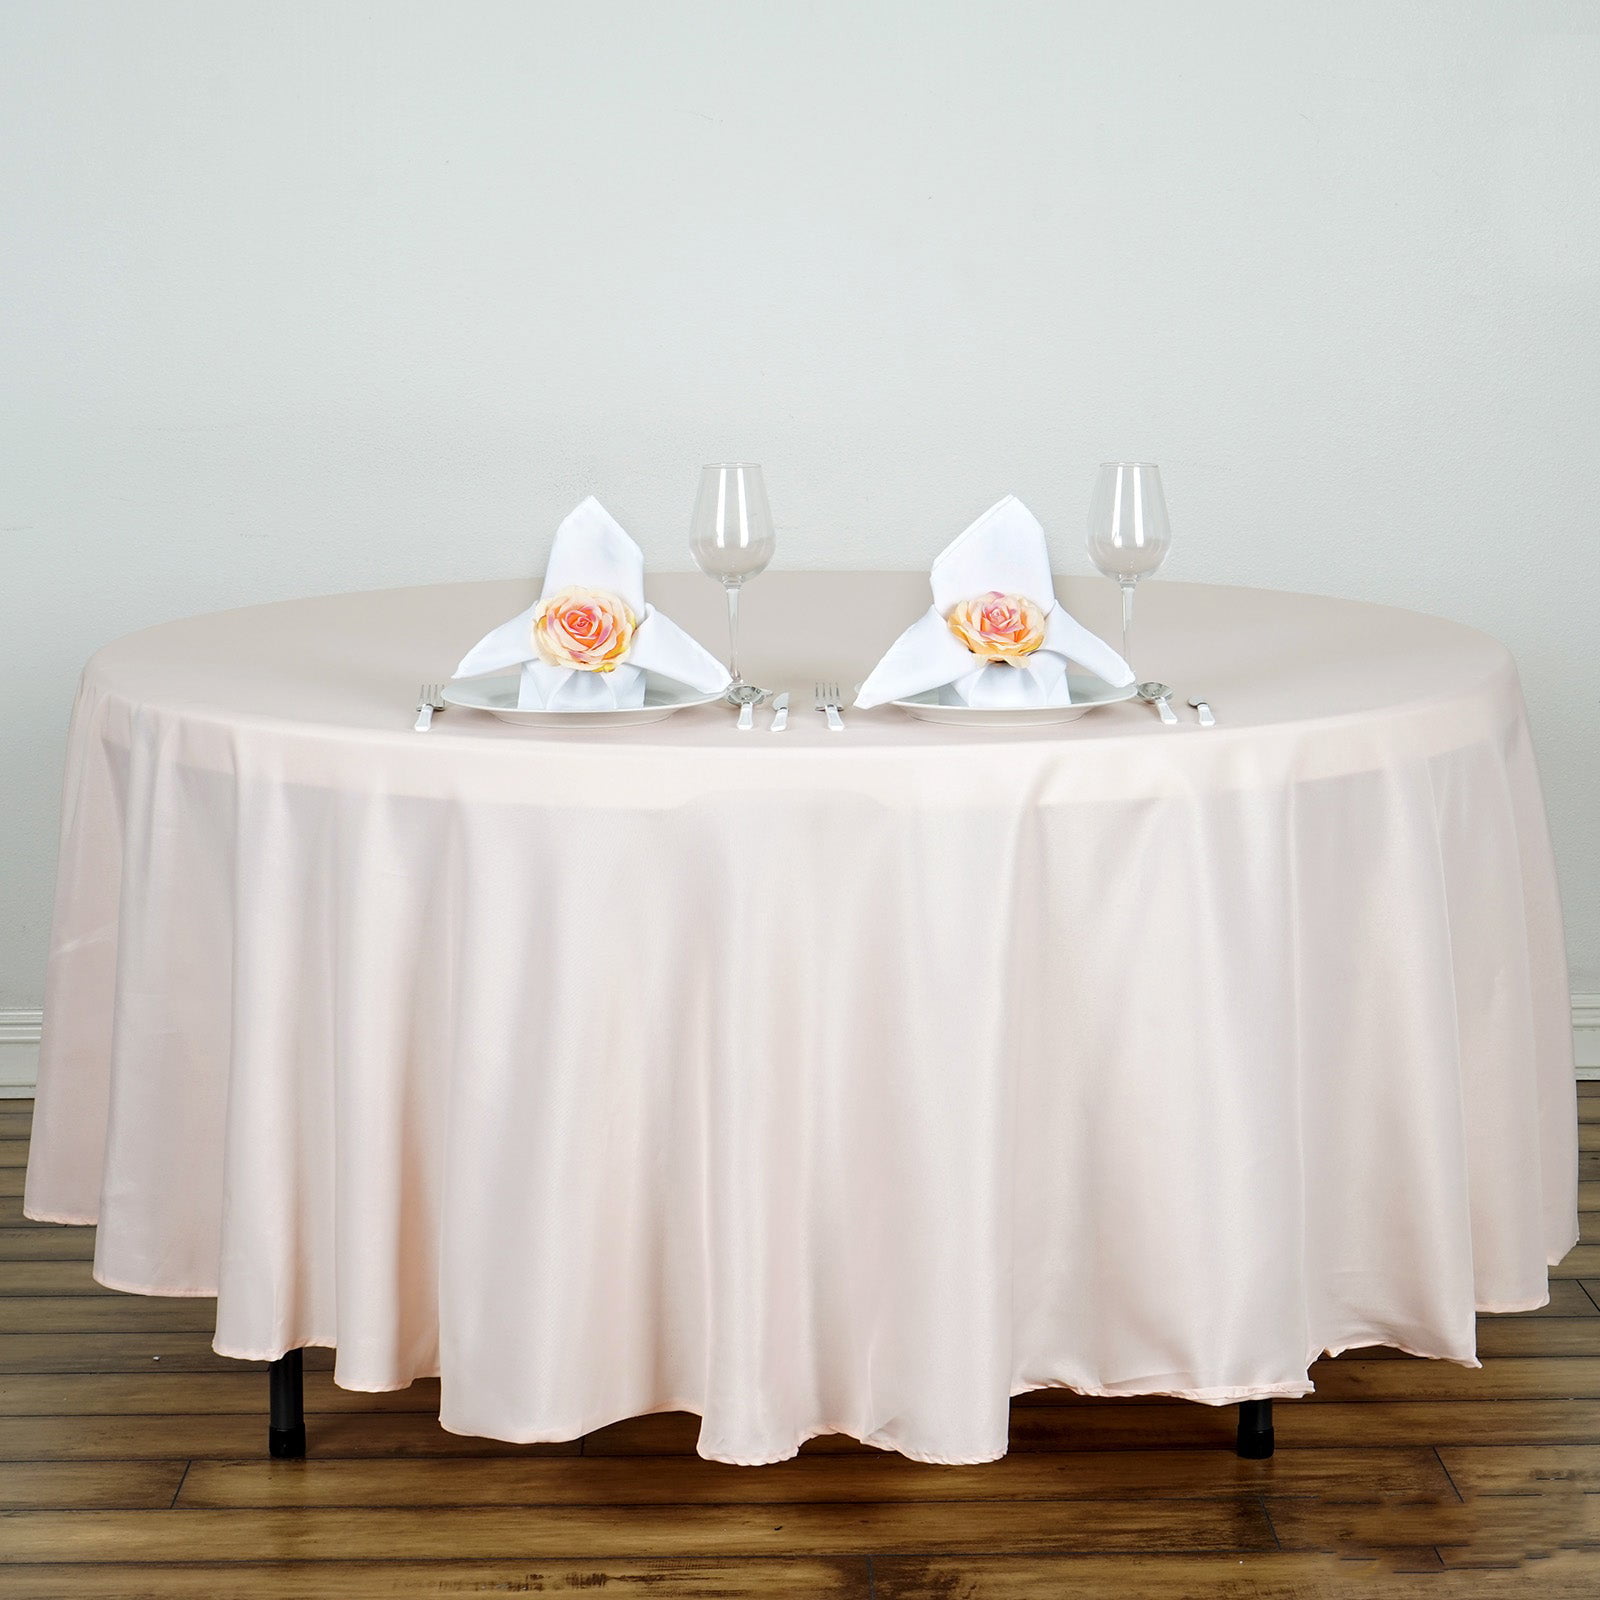 10 pcs 108" White Round Polyester Tablecloth Bulk for Weddings Party 